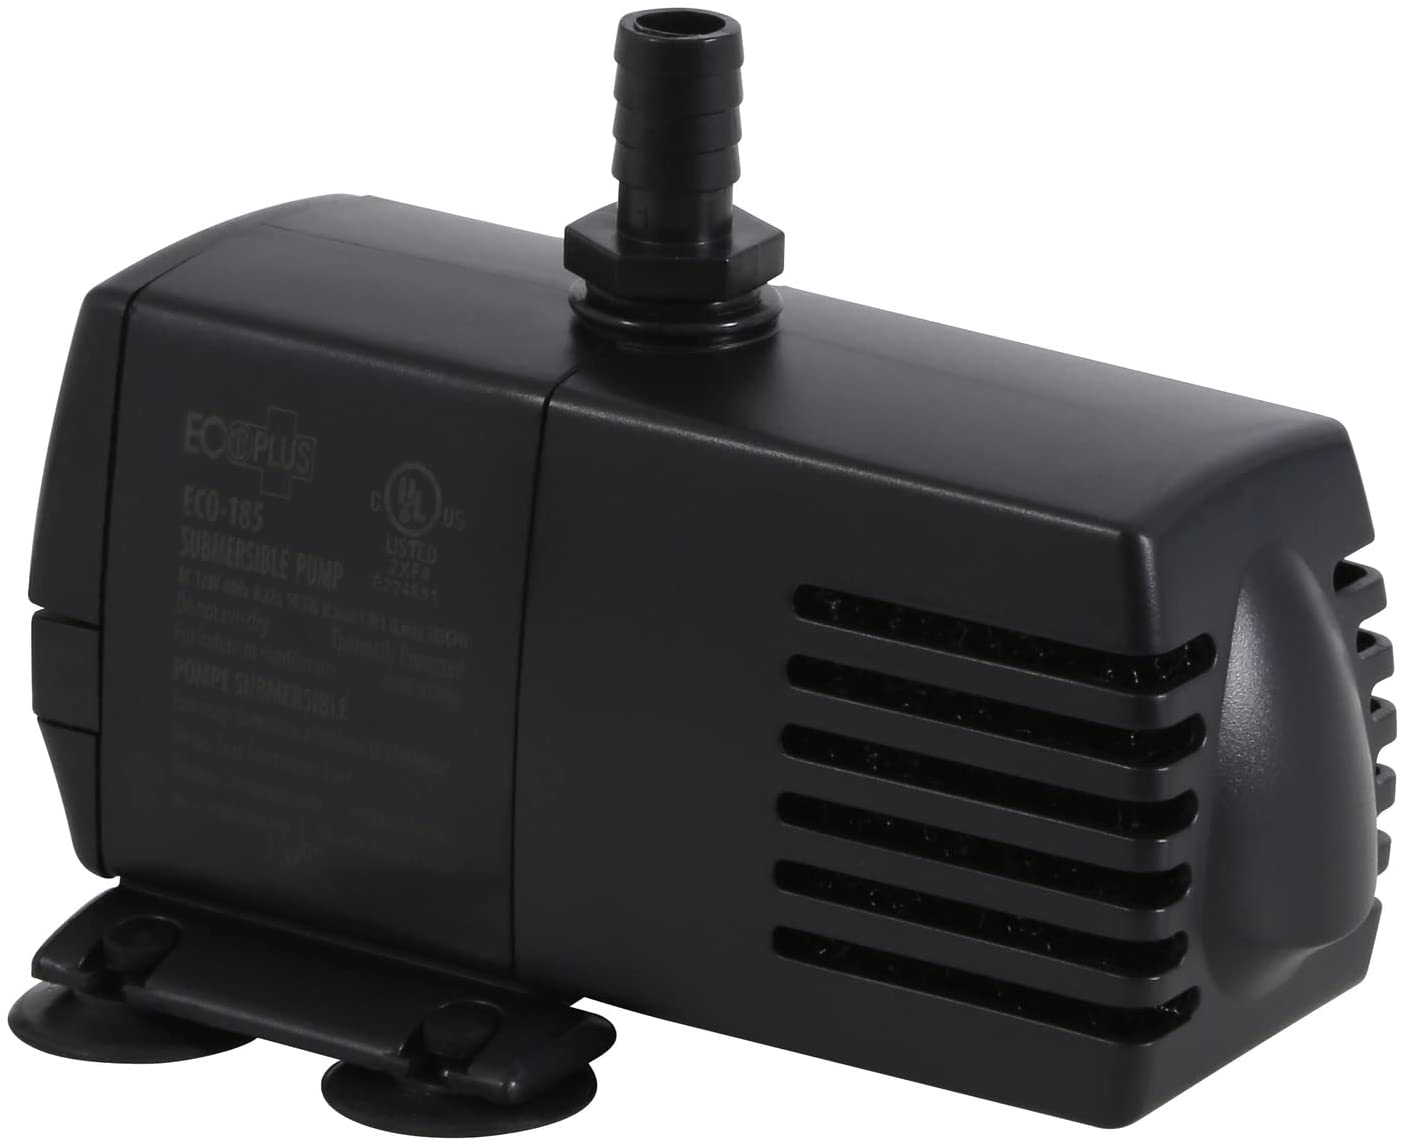 Ecoplus Eco 185 Water Pump Fixed Flow Submersible or Inline for Aquariums, Ponds, Fountains & Hydroponics - UL Listed, 158 GPH, Black Animals & Pet Supplies > Pet Supplies > Fish Supplies > Aquarium & Pond Tubing Ecoplus Ink Fixed Flow 158 GPH 